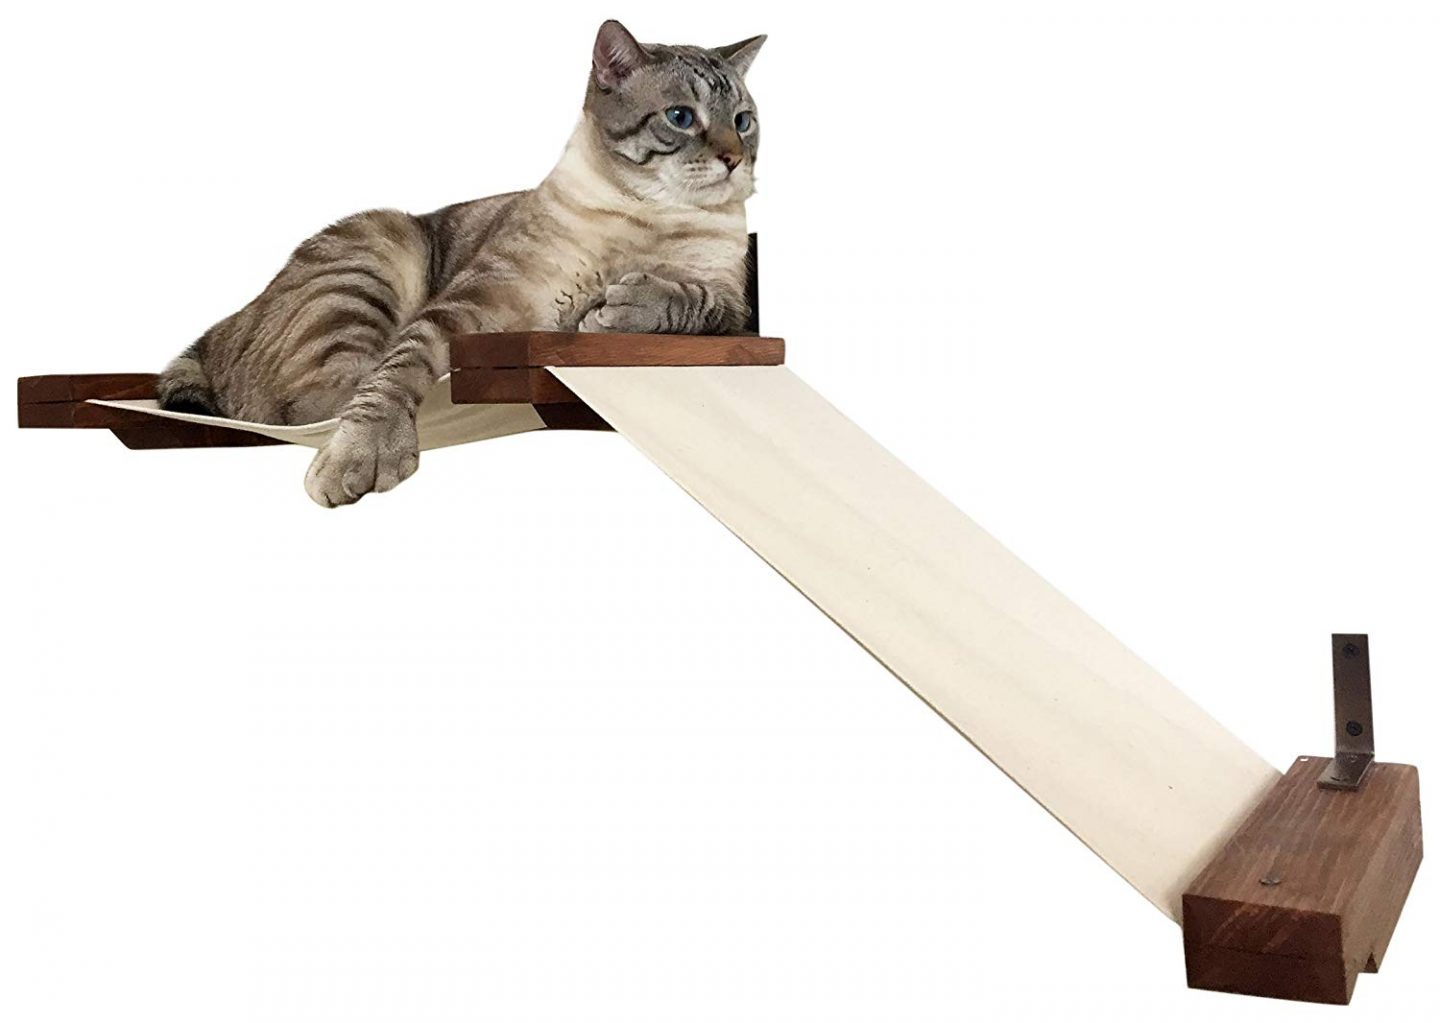 Wall Mounted Cat Lounger With Fabric Ramp - What a super cool and innovative wall mounted cat perch! It's GREAT for large cats, too!